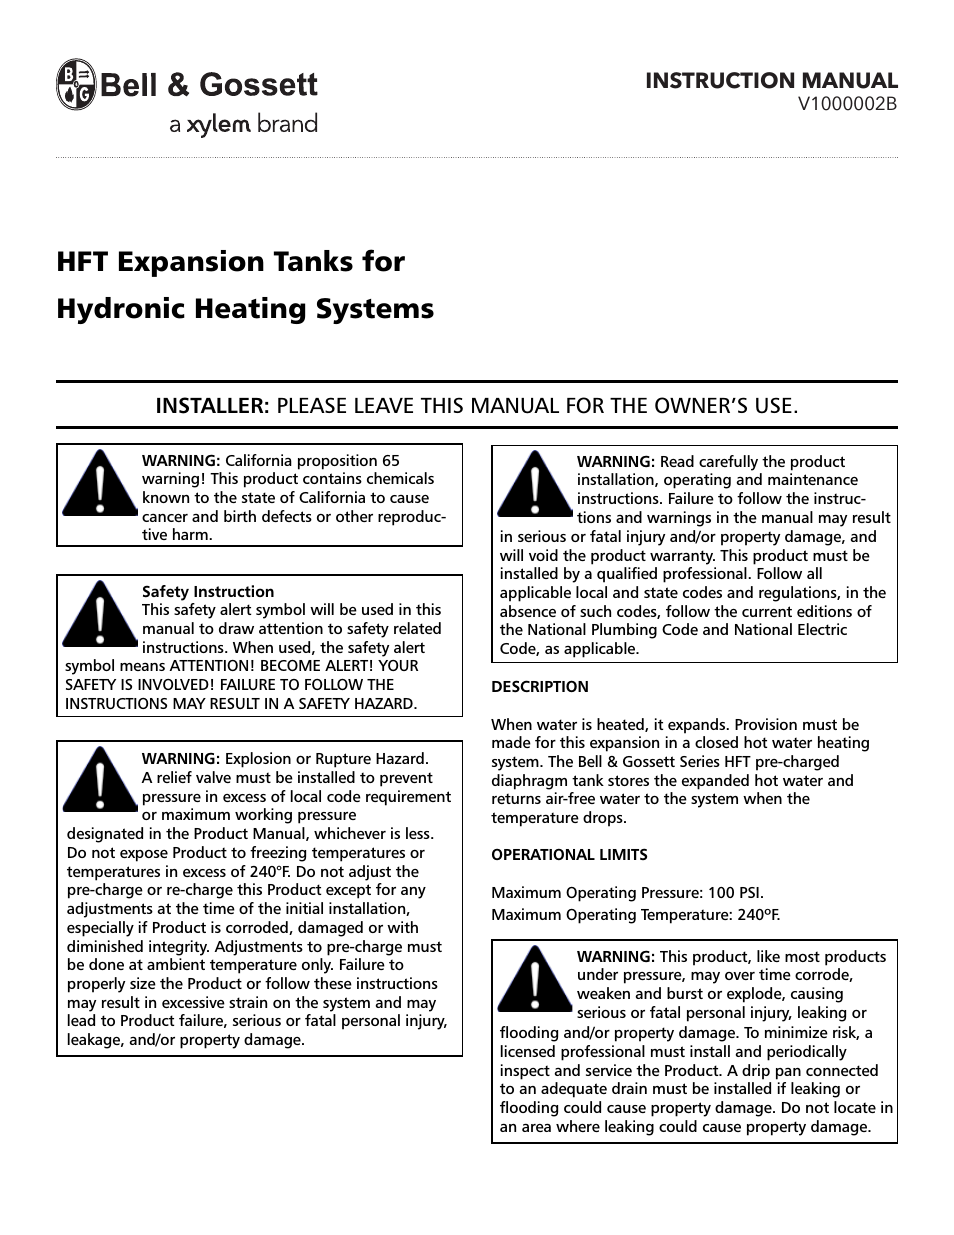 HFT Expansion Tanks for Hydronic Heating Systems